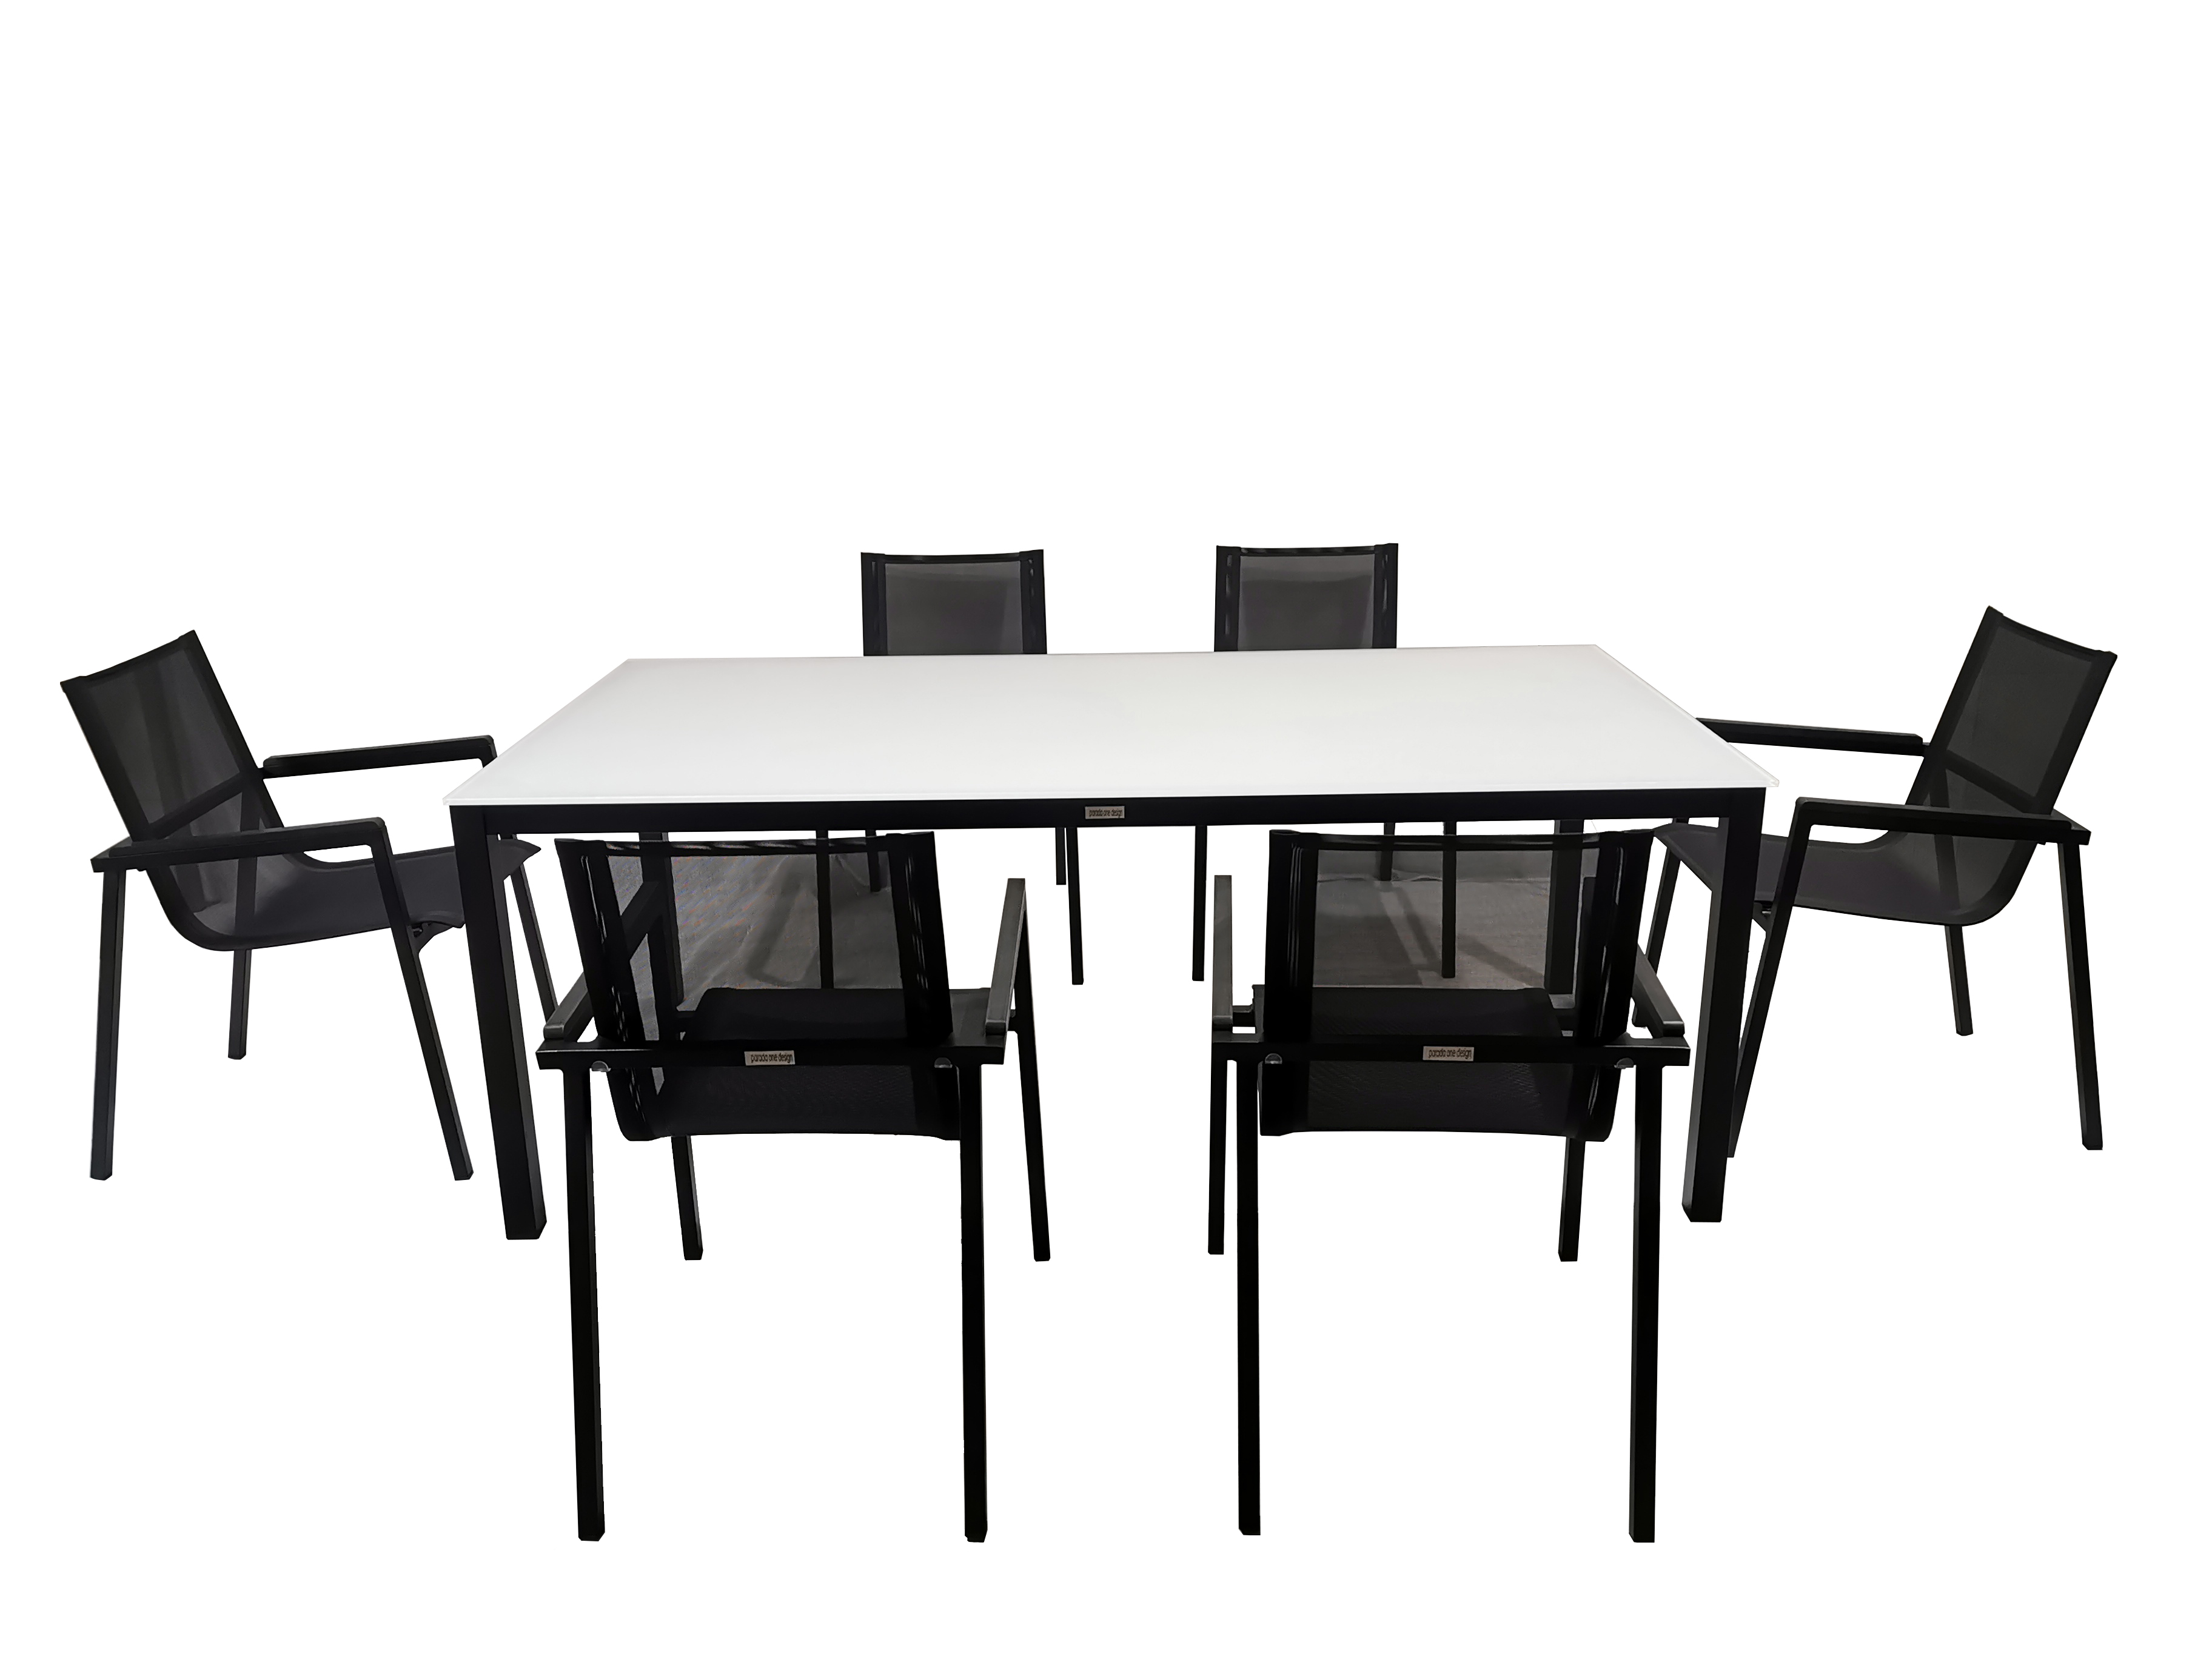 NOTTE DINING TABLE AB- BACIO CHAIR AB SET